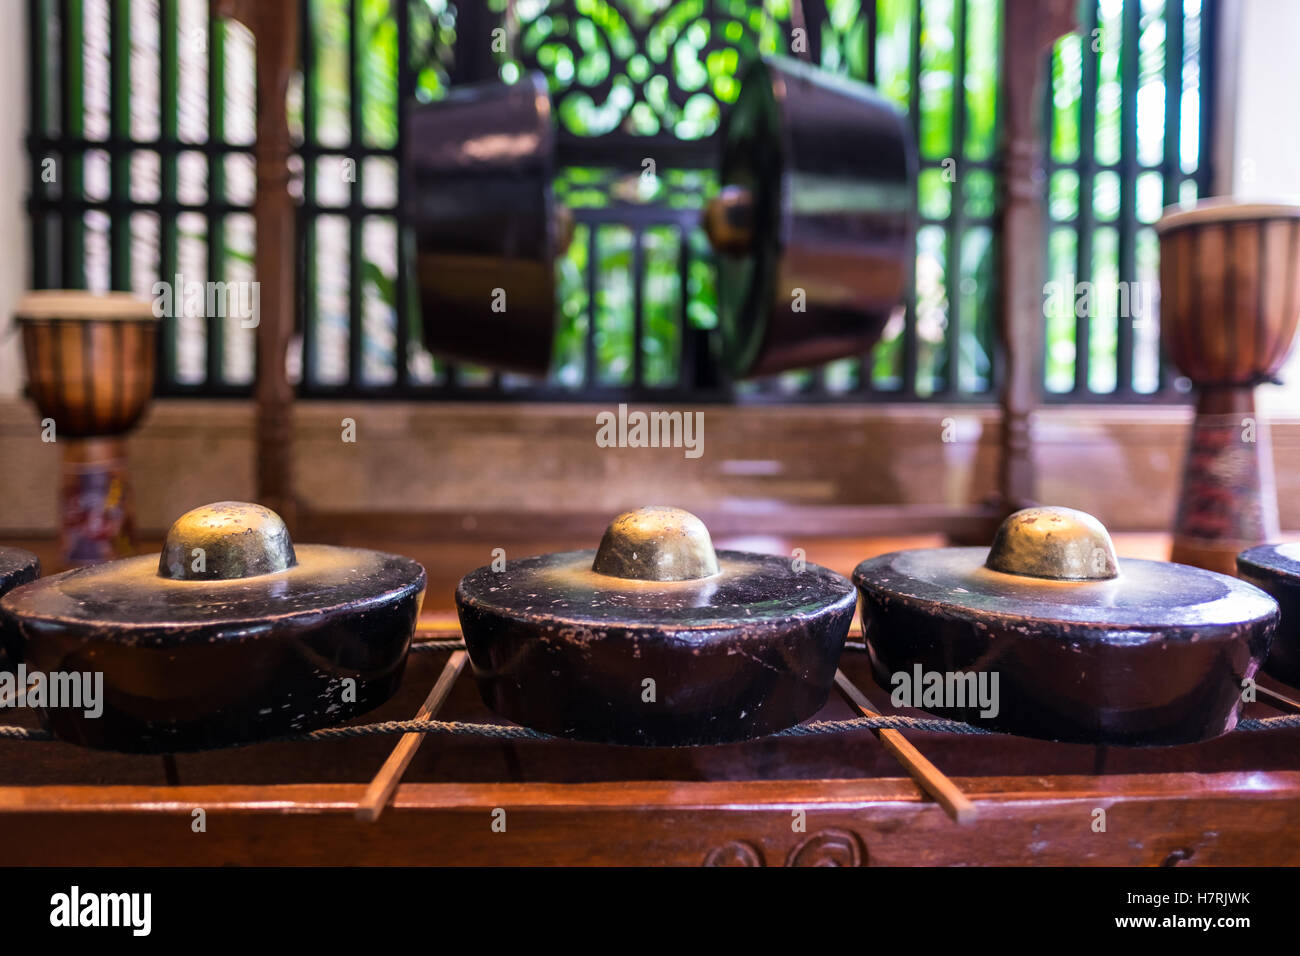 Tradition gong or drum used by indigenous population of Borneo called Kadazan and Dusun. Stock Photo